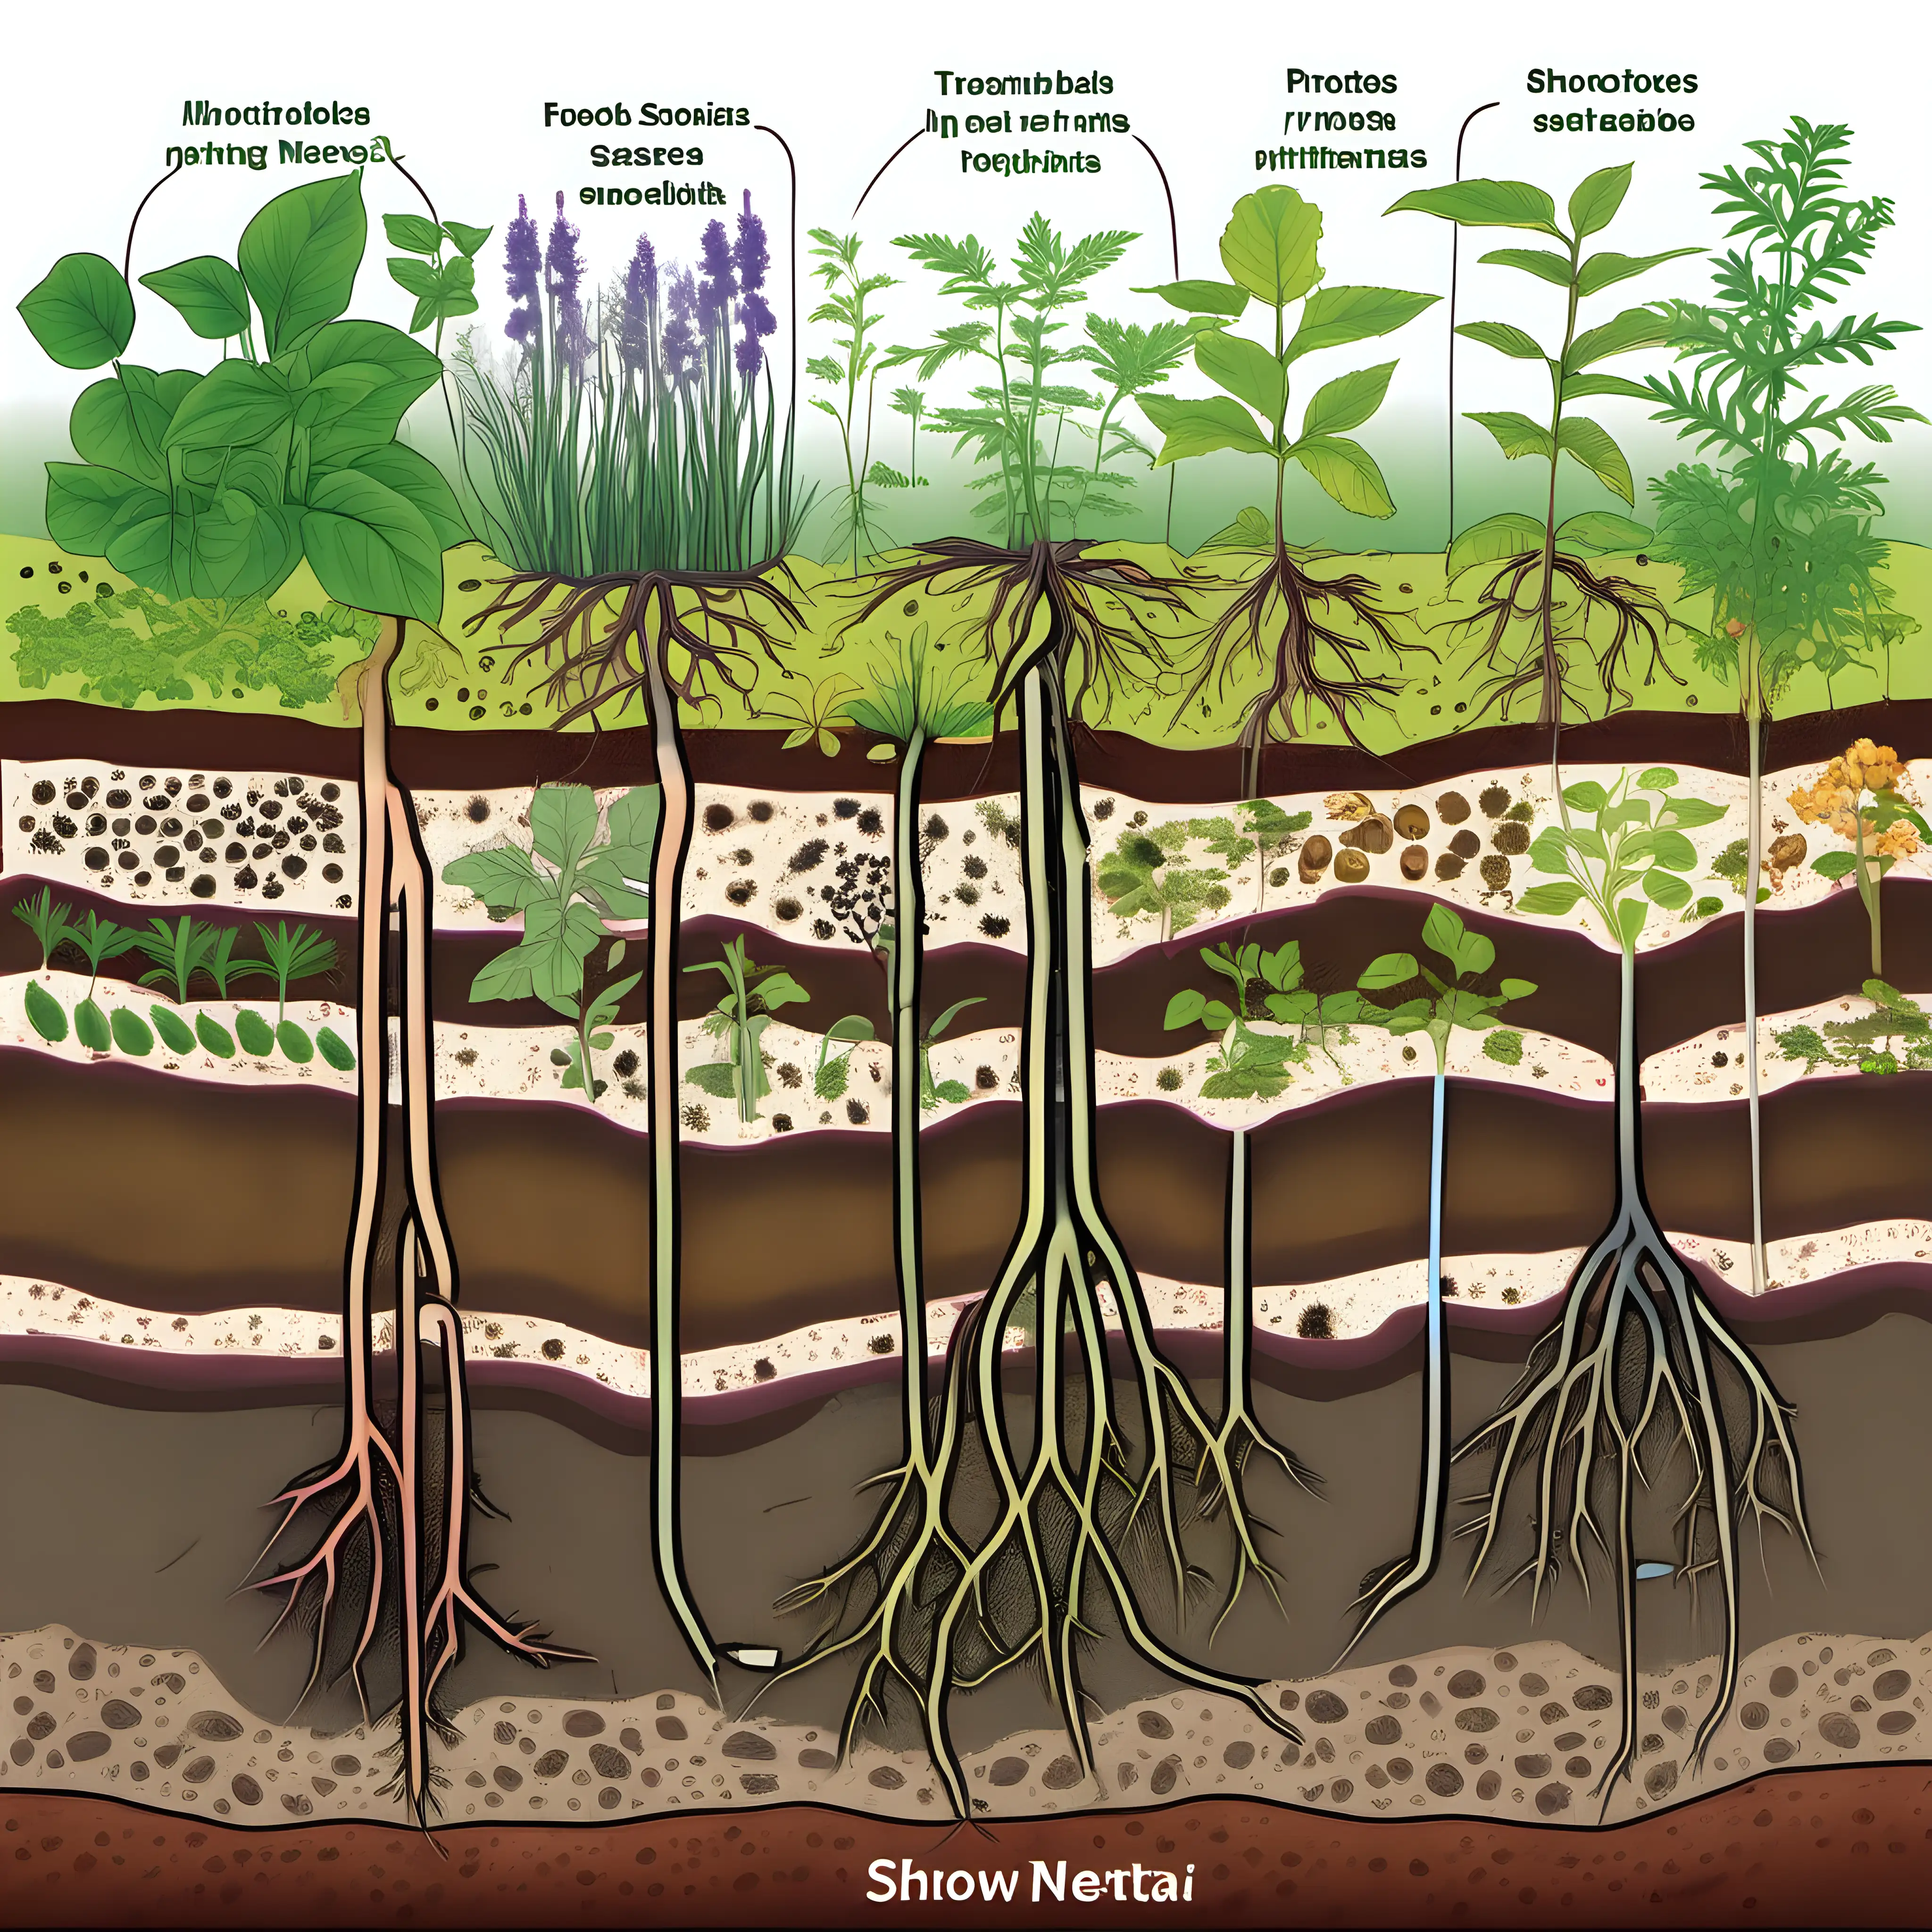  microbes under the soil  showing the soil food web divide into two with plants above.  show the roots.  show the herbs above in a full garden.  show the microbes below the protozoa including fungi, nematodes, aemobeas and bacteria  no words
